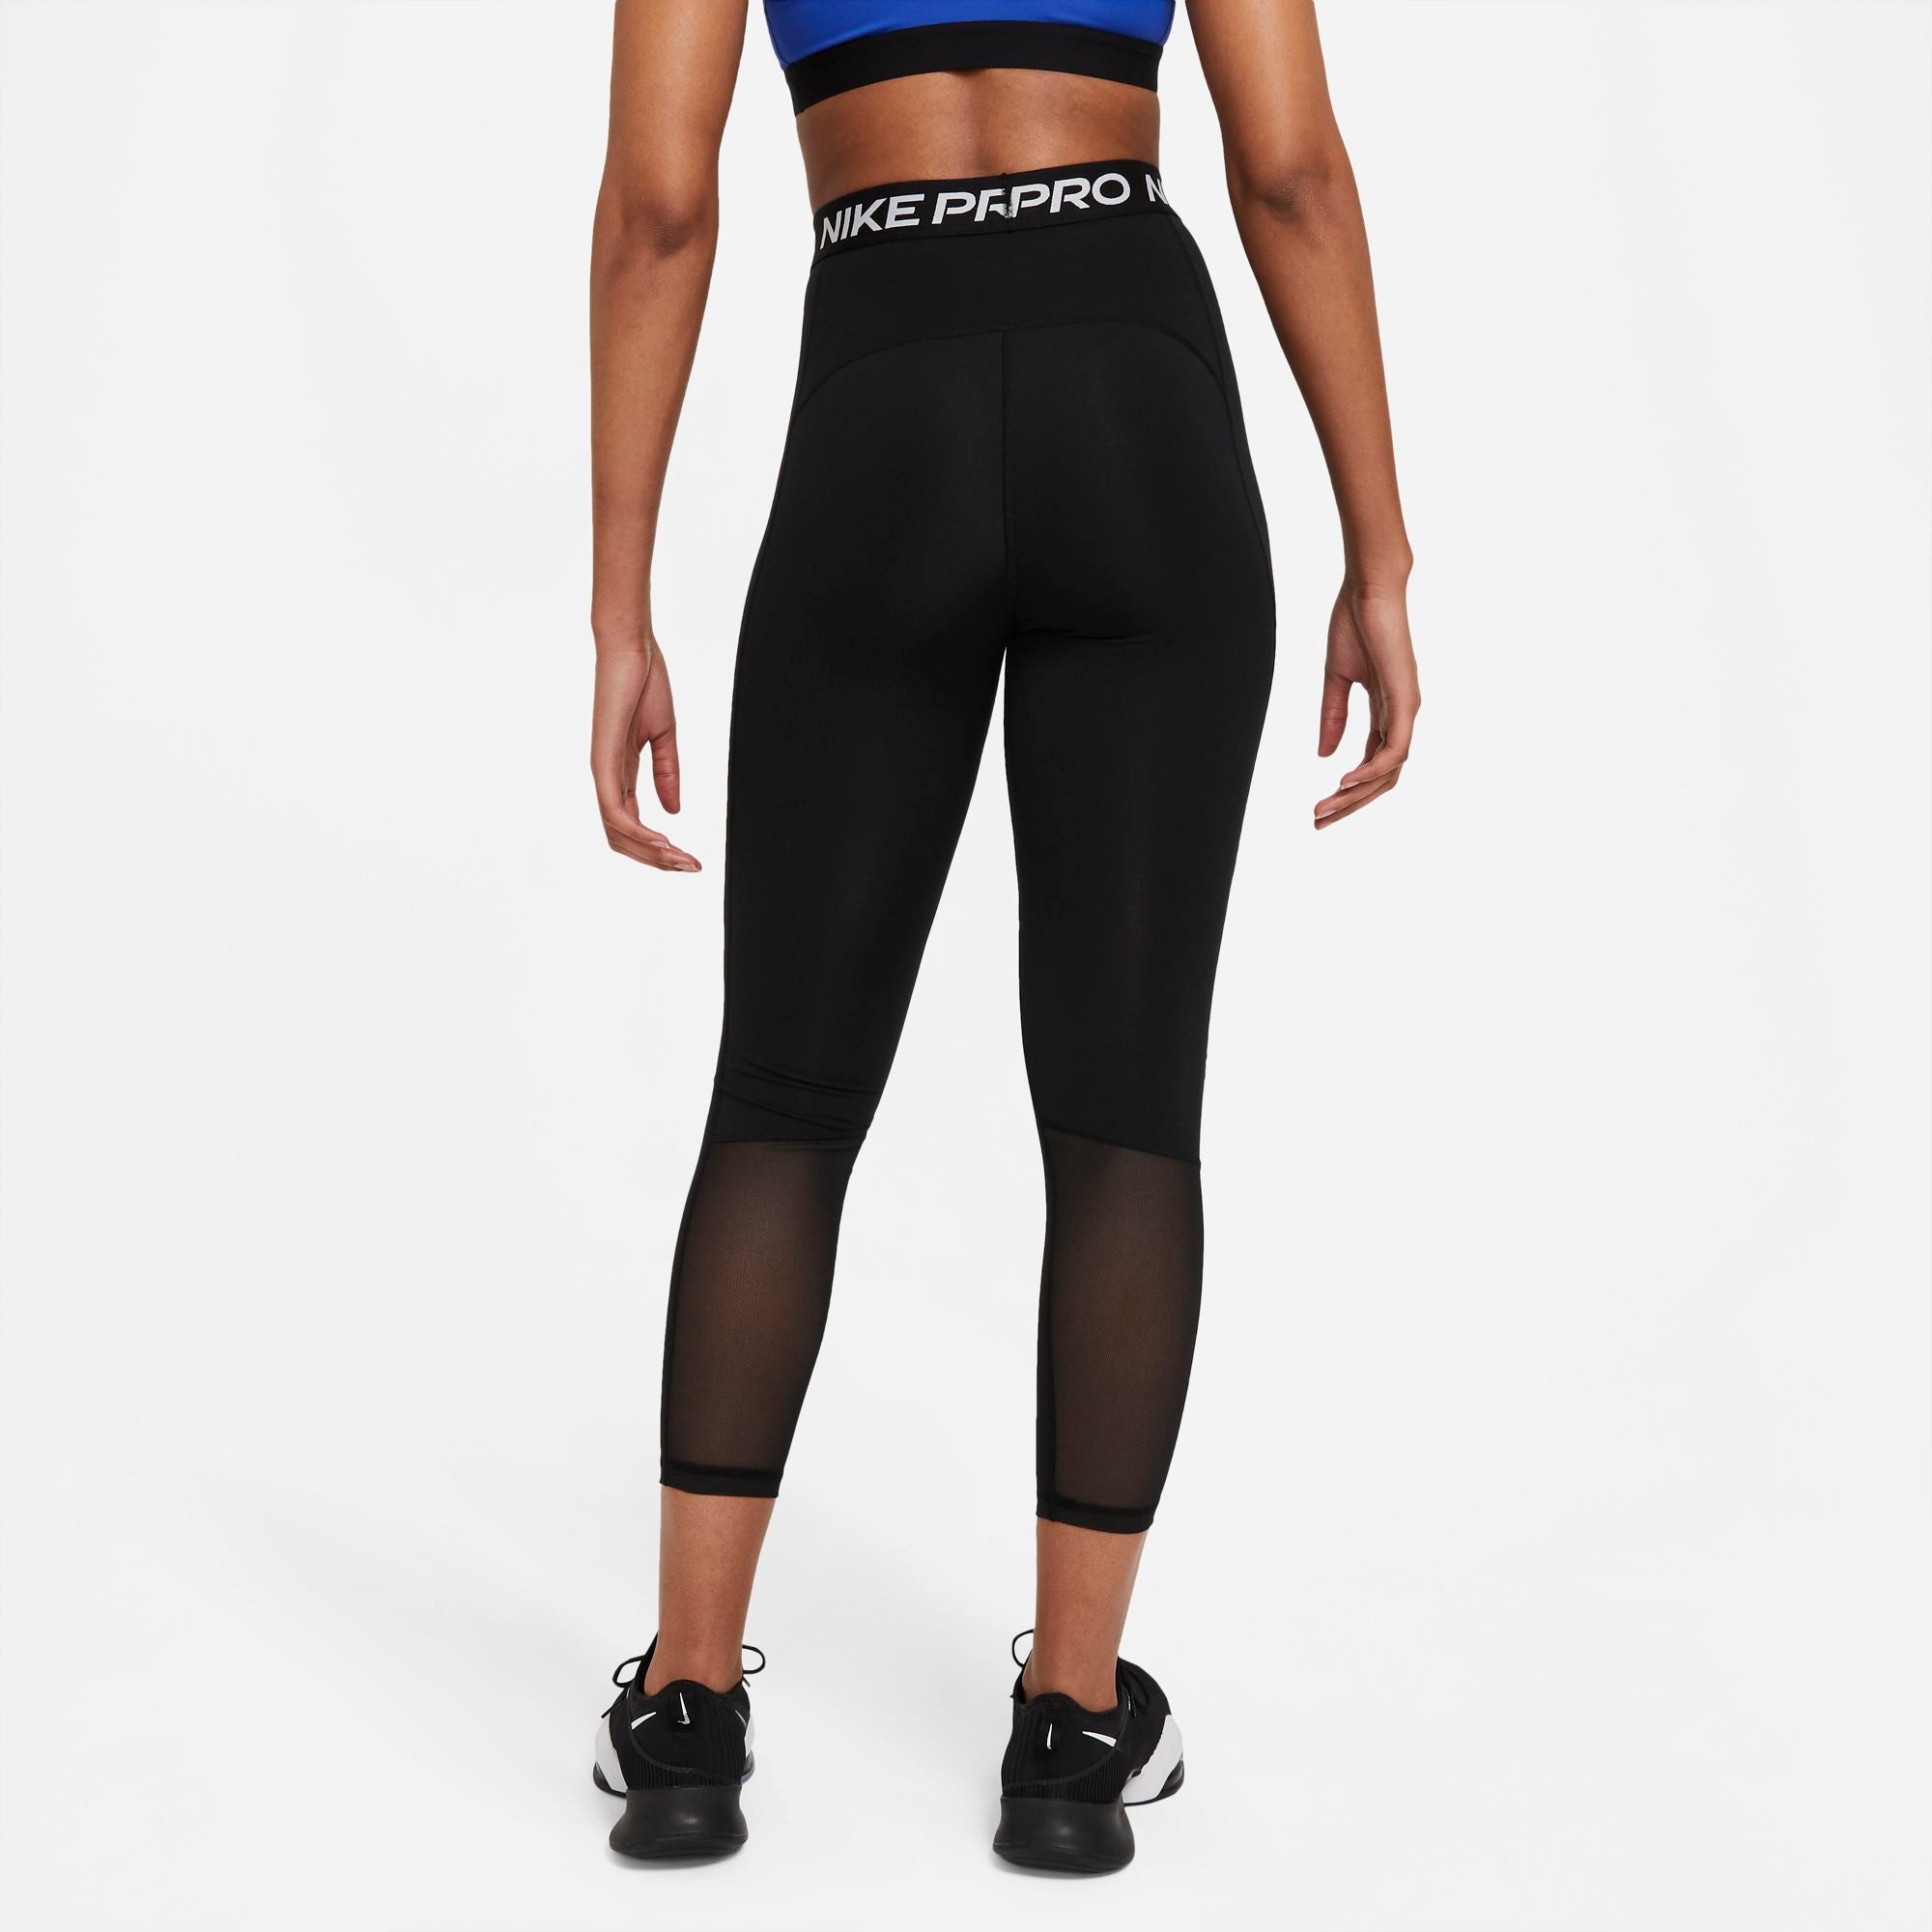 NIKE PRO 365 WOMENS HIGH-RISE 7/8 TIGHTS